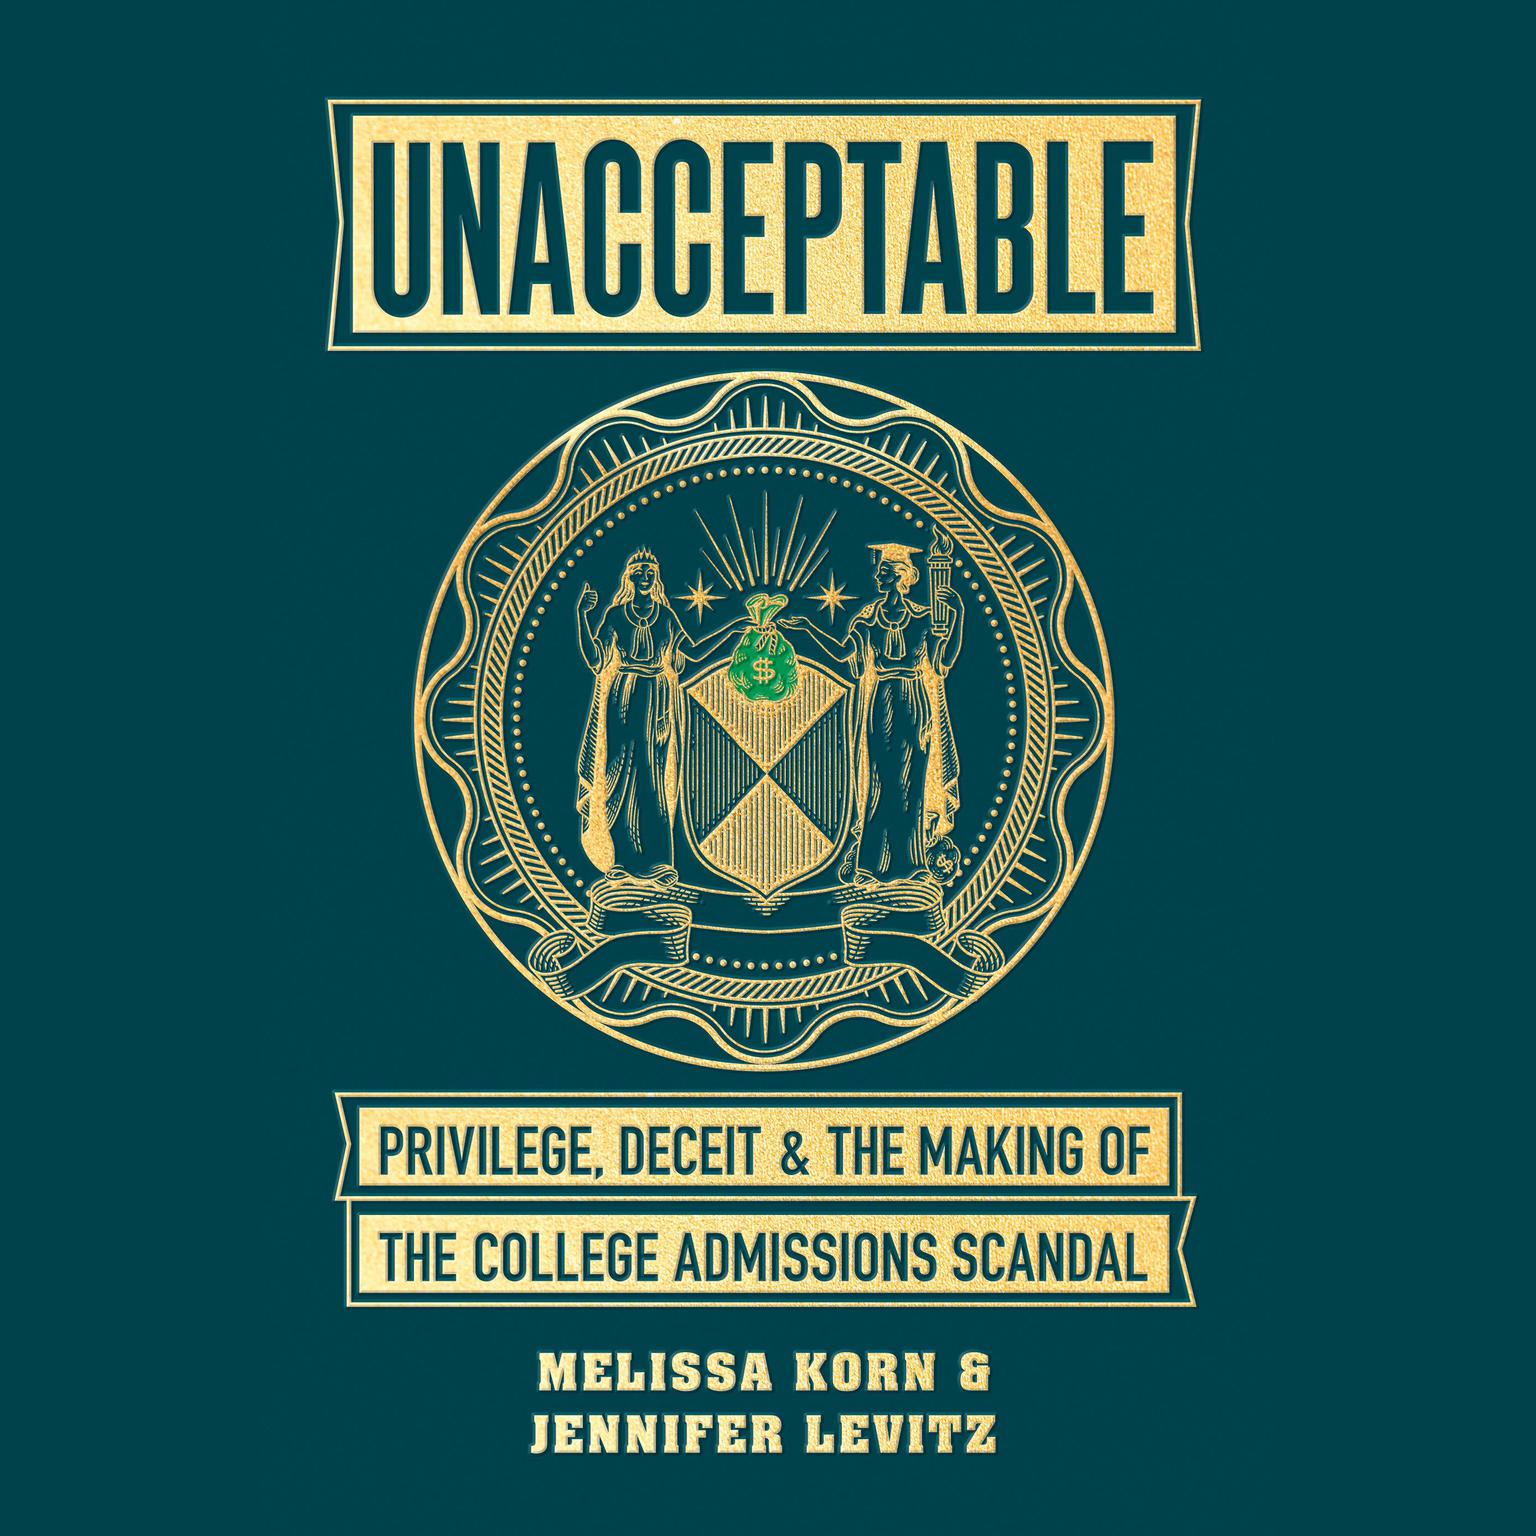 Unacceptable: Privilege, Deceit & the Making of the College Admissions Scandal Audiobook, by Jennifer Levitz